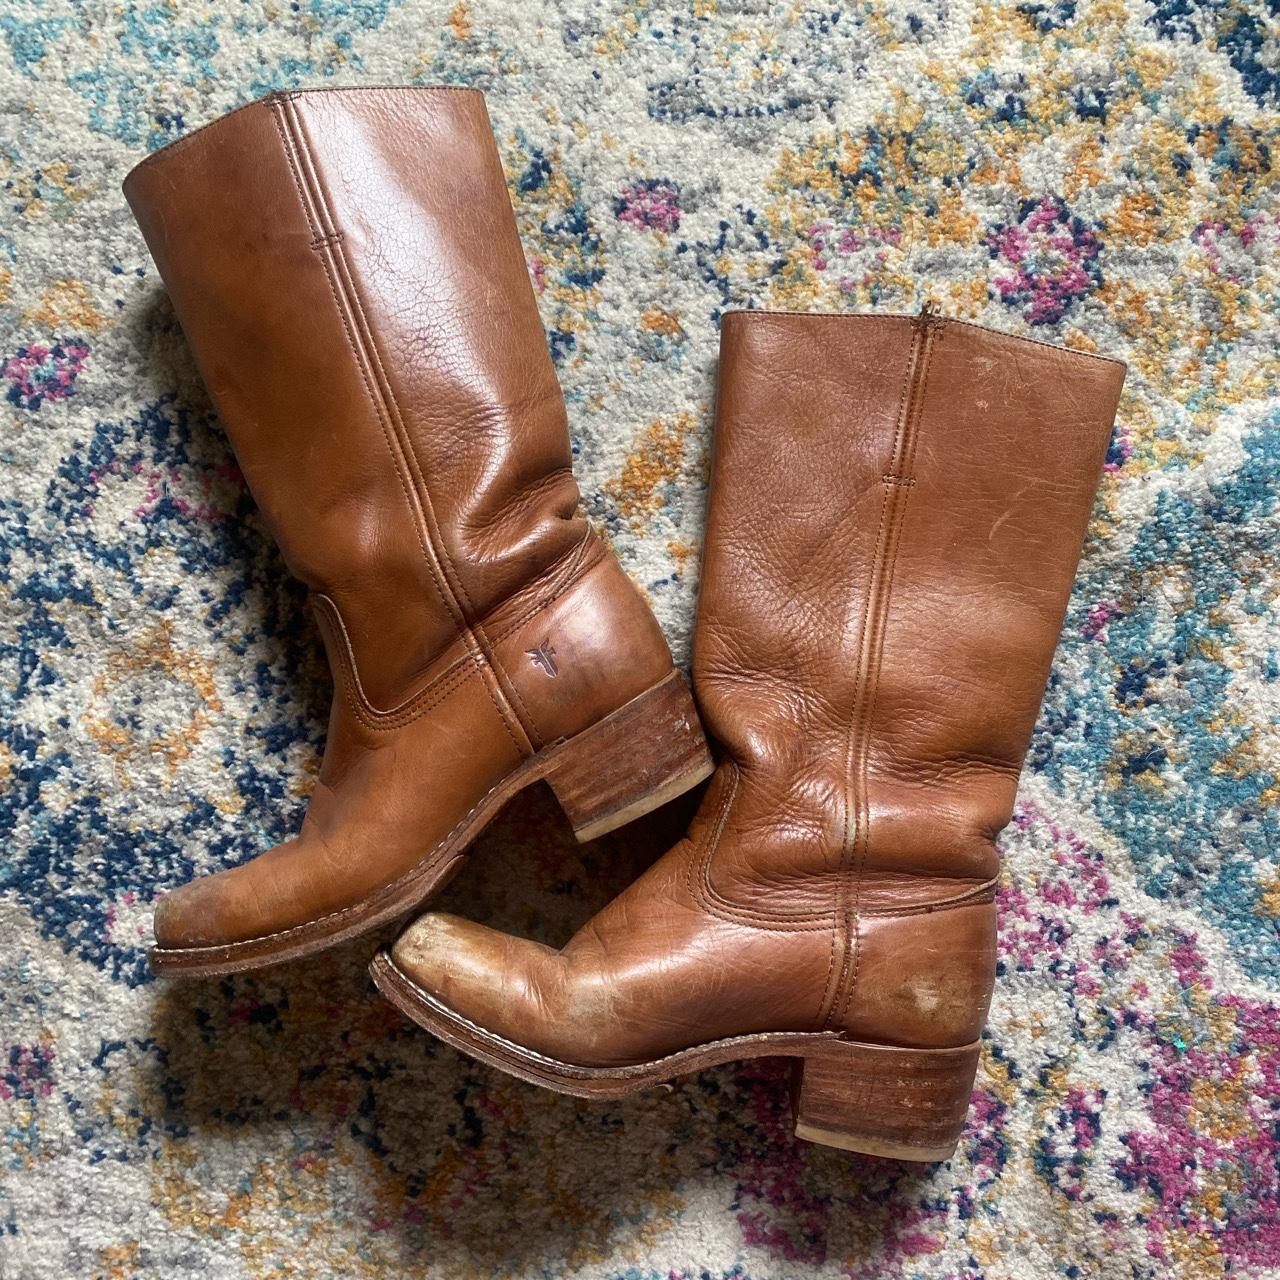 Frye Women's Brown and Tan Boots